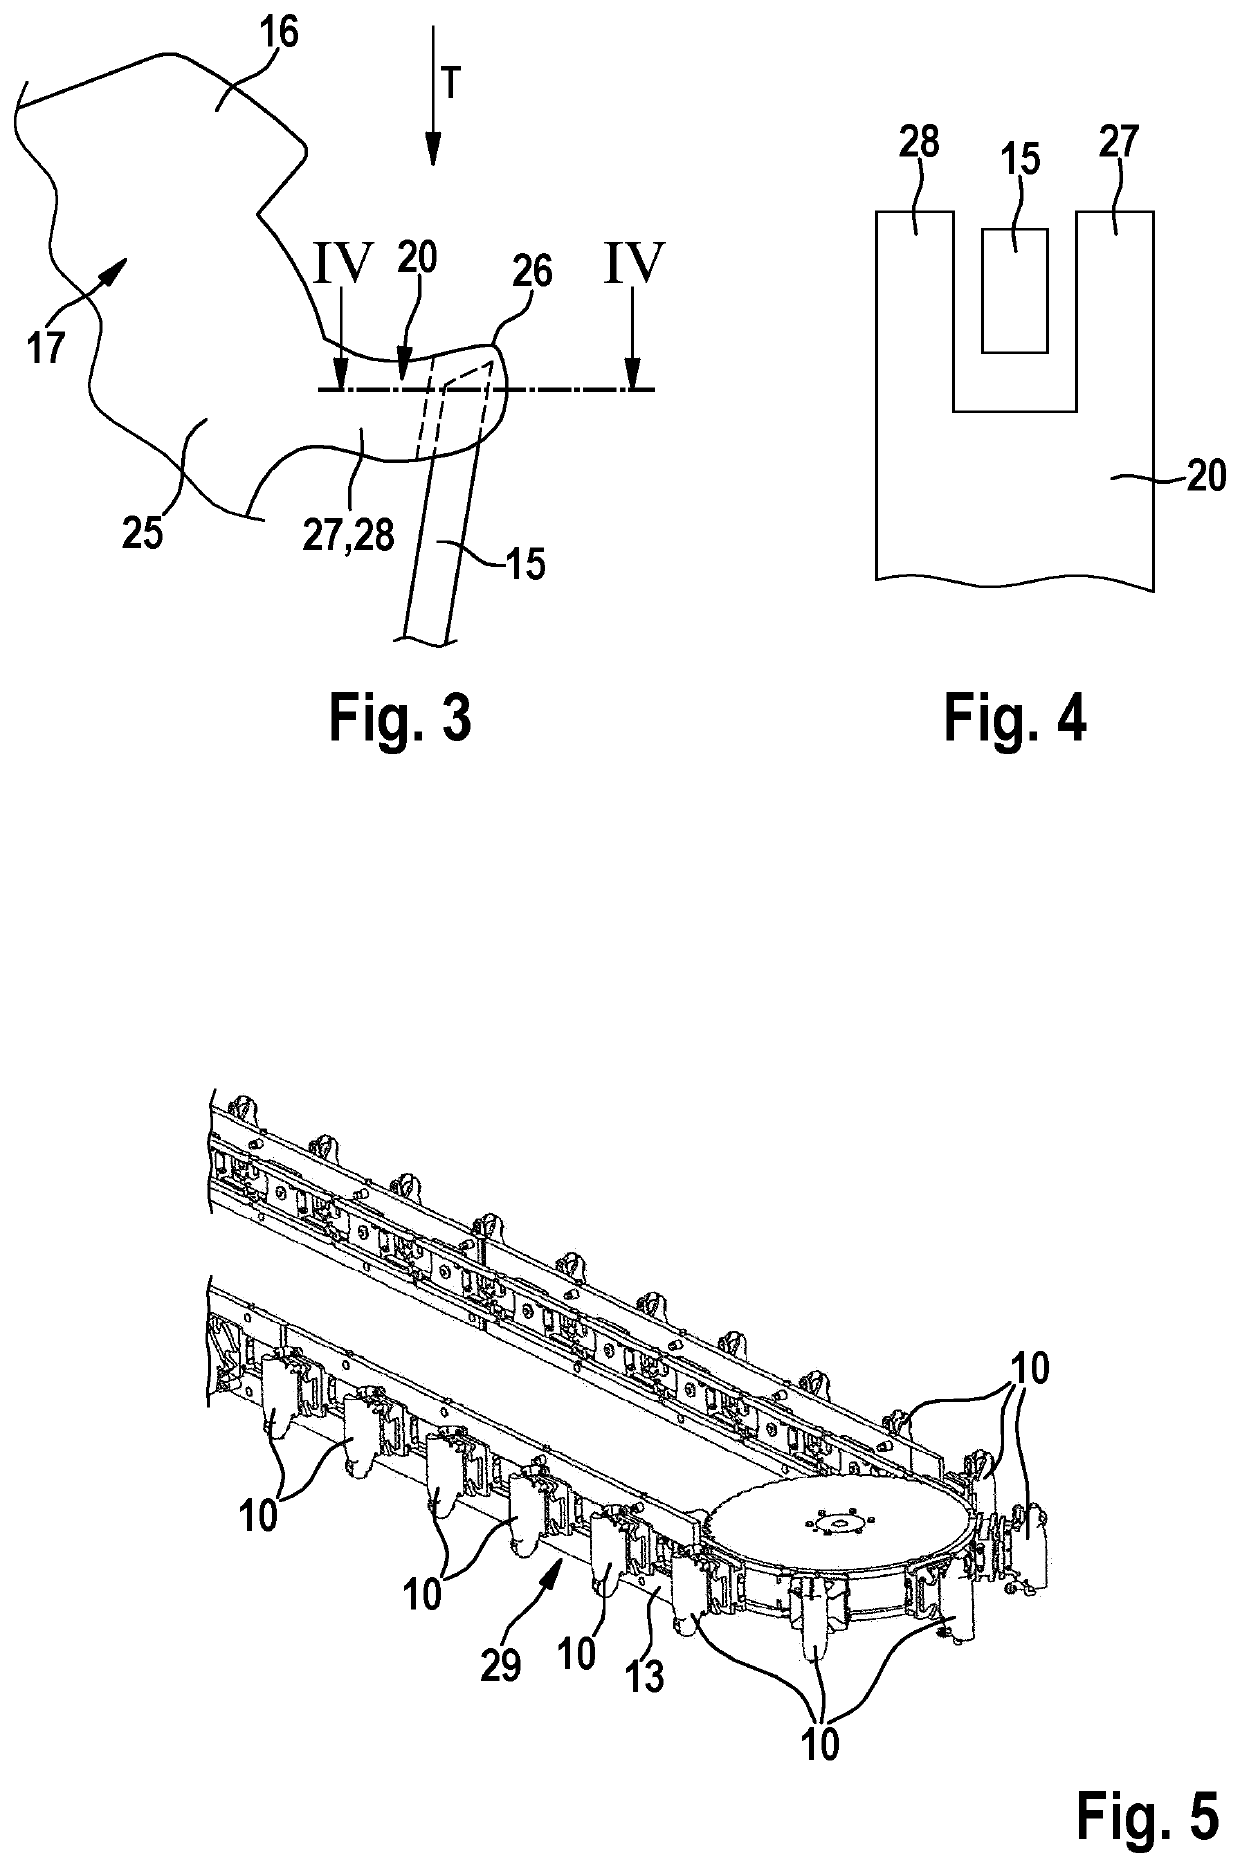 Holding apparatus for holding a gutted poultry carcass or a part thereof during processing in a device for processing gutted poultry carcasses or parts thereof